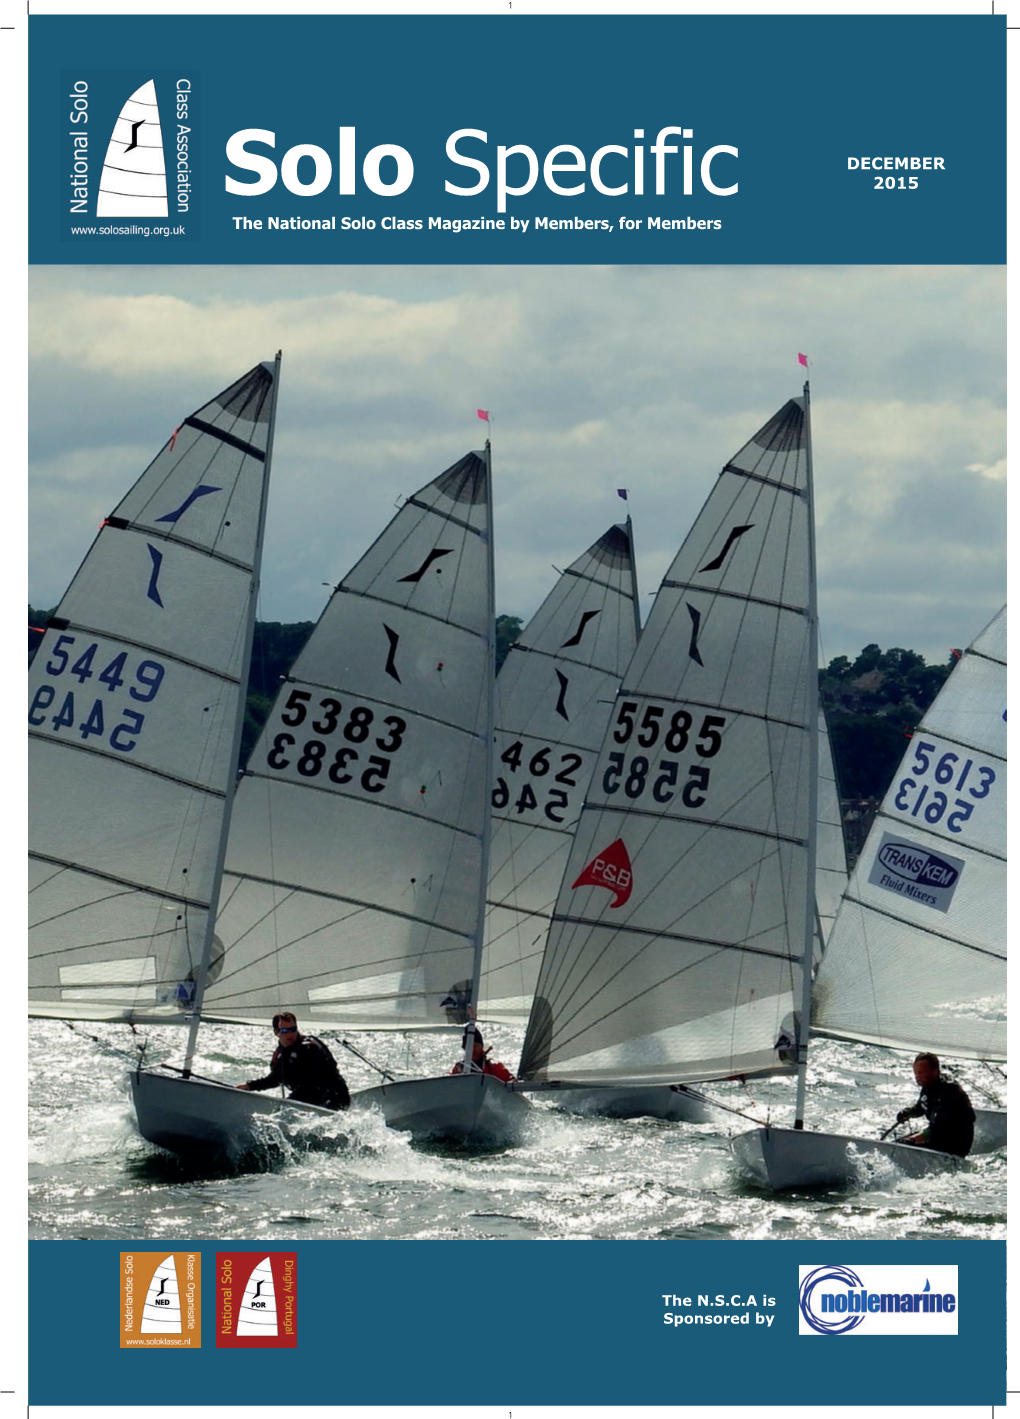 Solo Specific 2015 the National Solo Class Magazine by Members, for Members